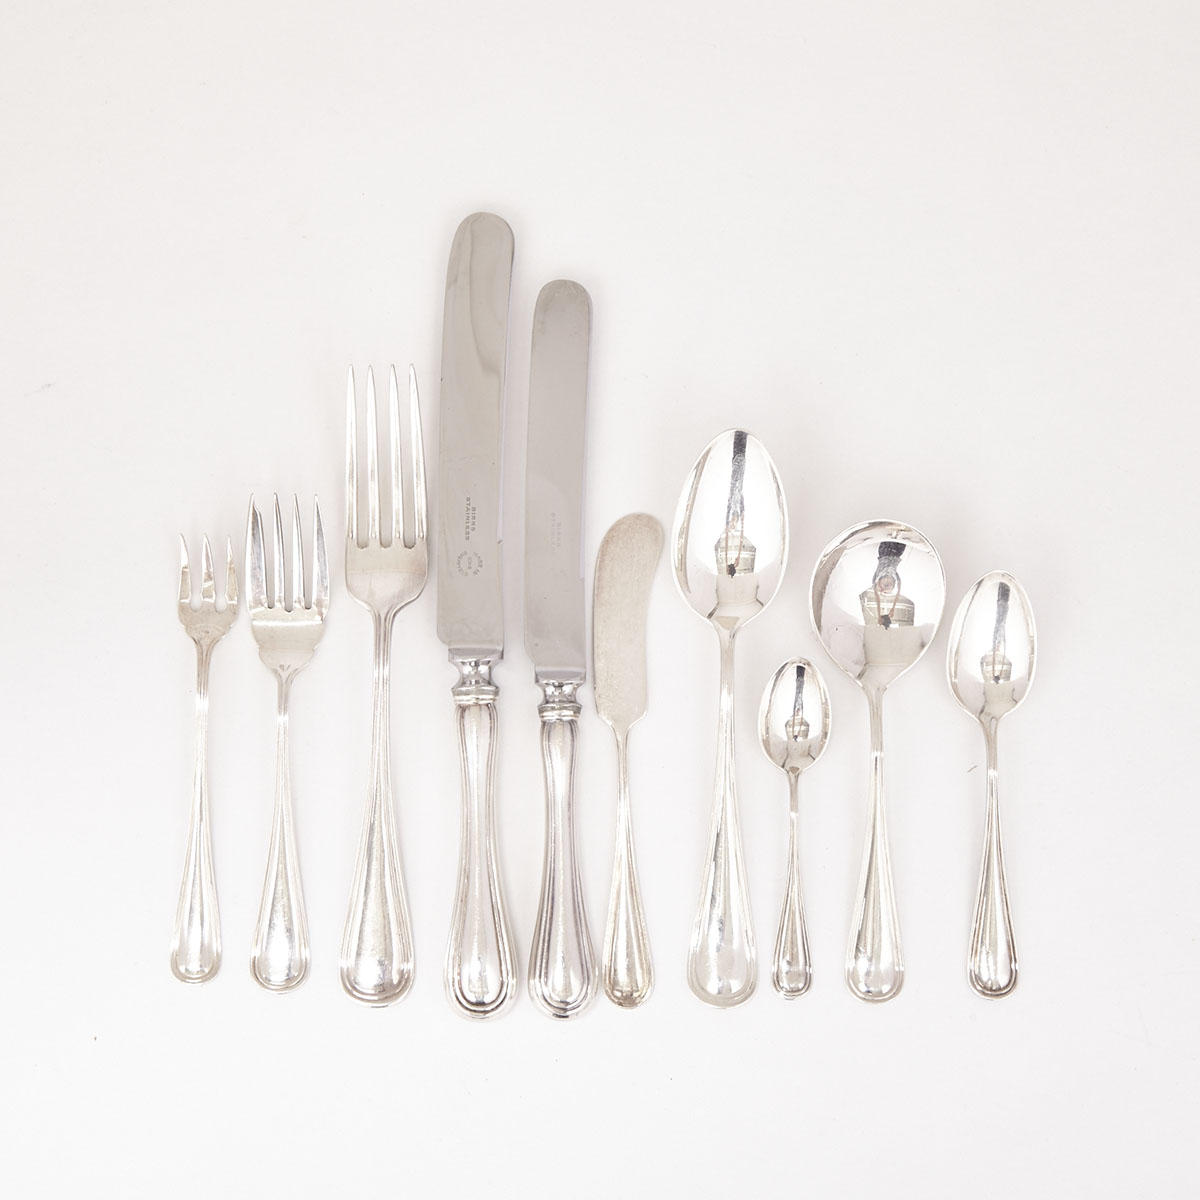 Canadian Silver ‘Thread’ Pattern Flatware Service, Henry Birks & Sons, Montreal, Que., 20th century 